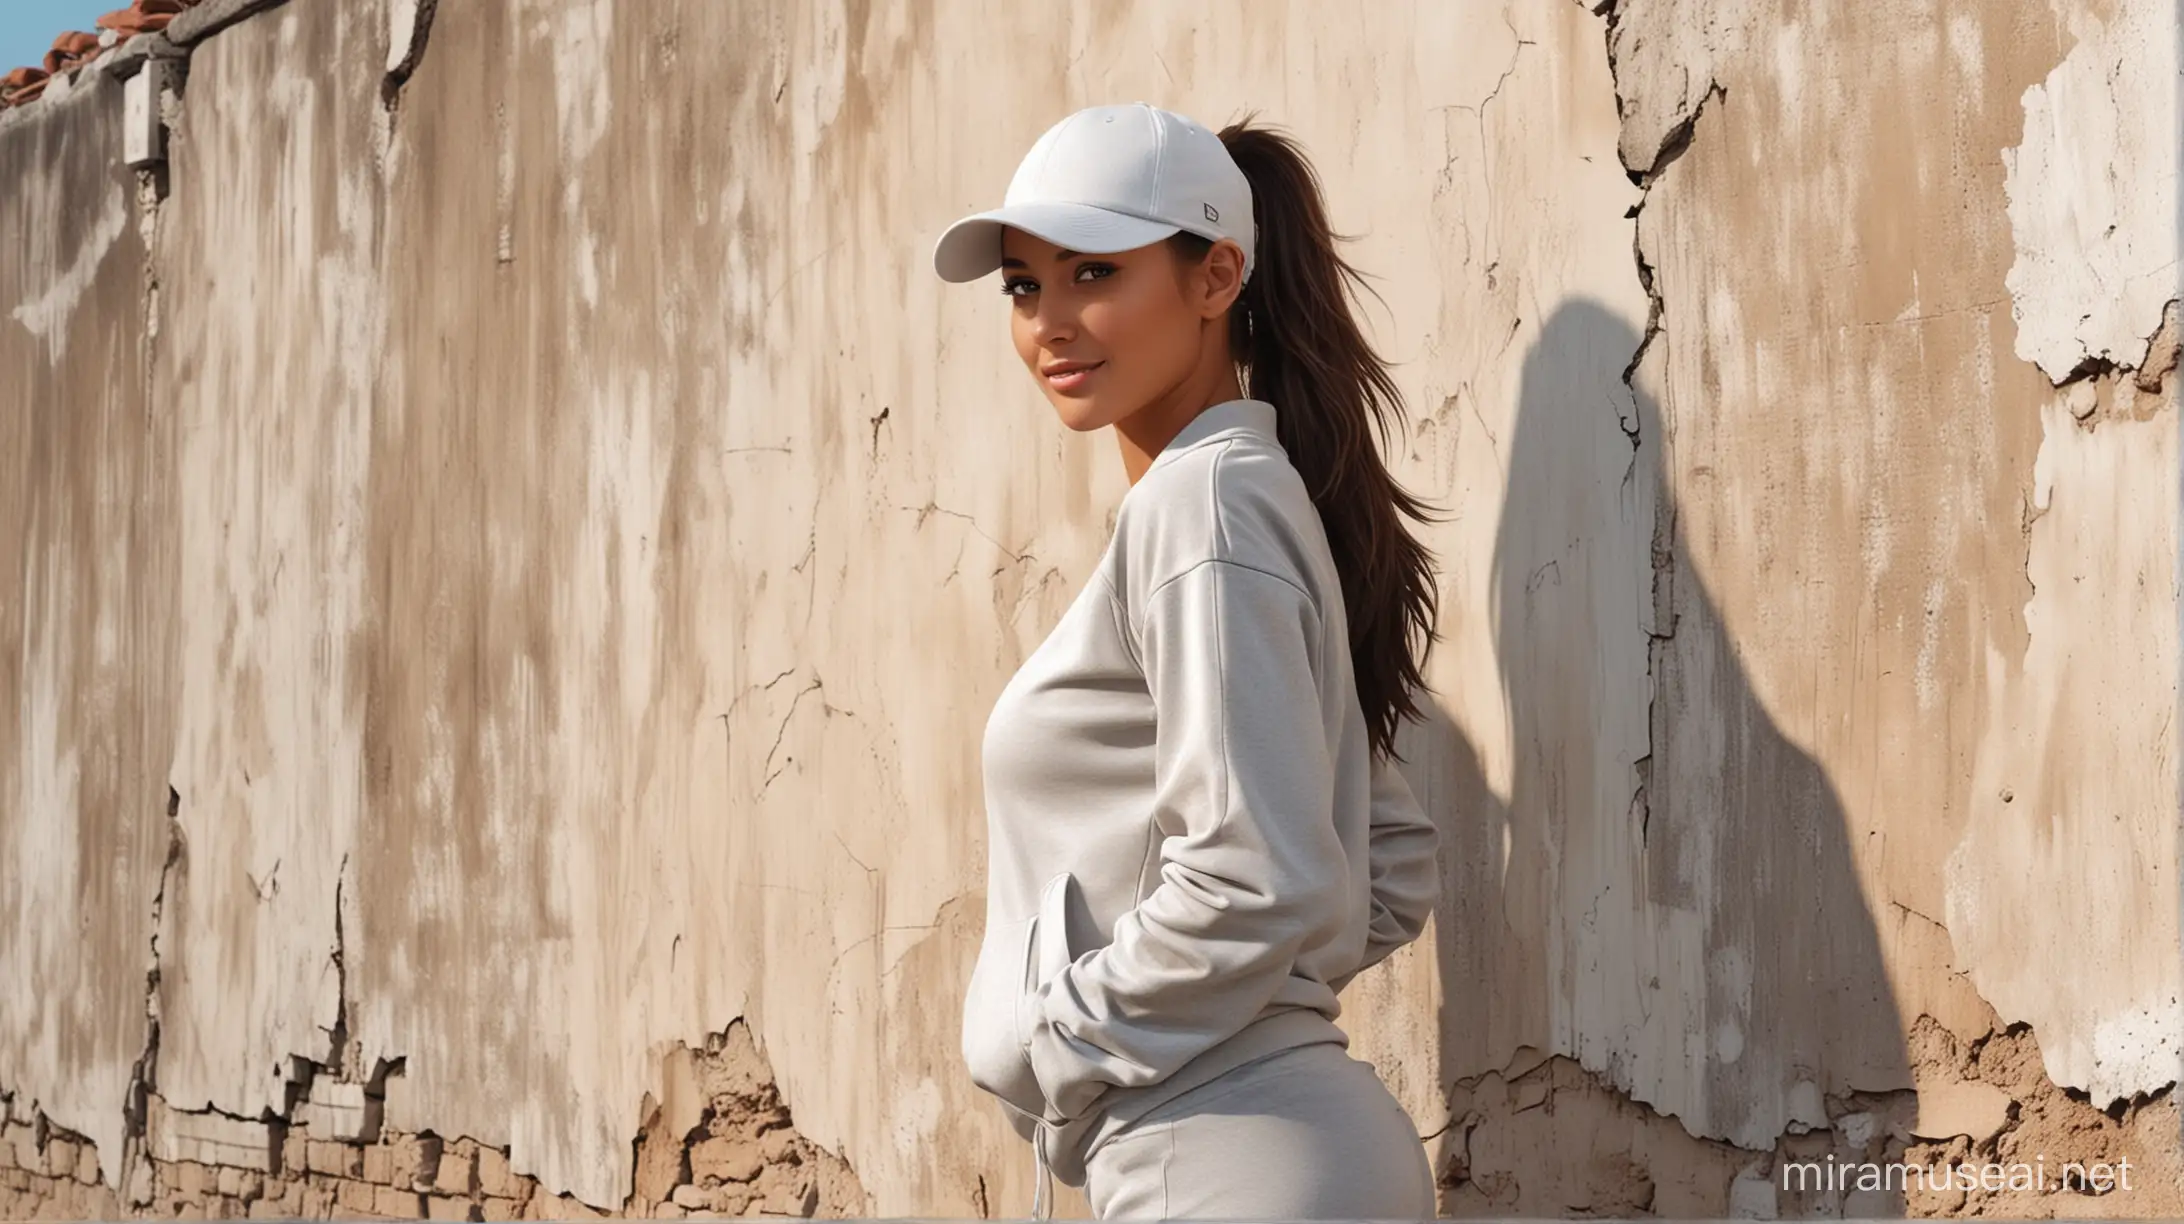 Draw a chic beauty with a beautiful tanned brunette girl, looking smiling towards the camera, wearing a tight tracksuit and white baseball cap, hair in a ponytail, standing against a wall, the wall is shabby and cracked, grunge style, super realistic